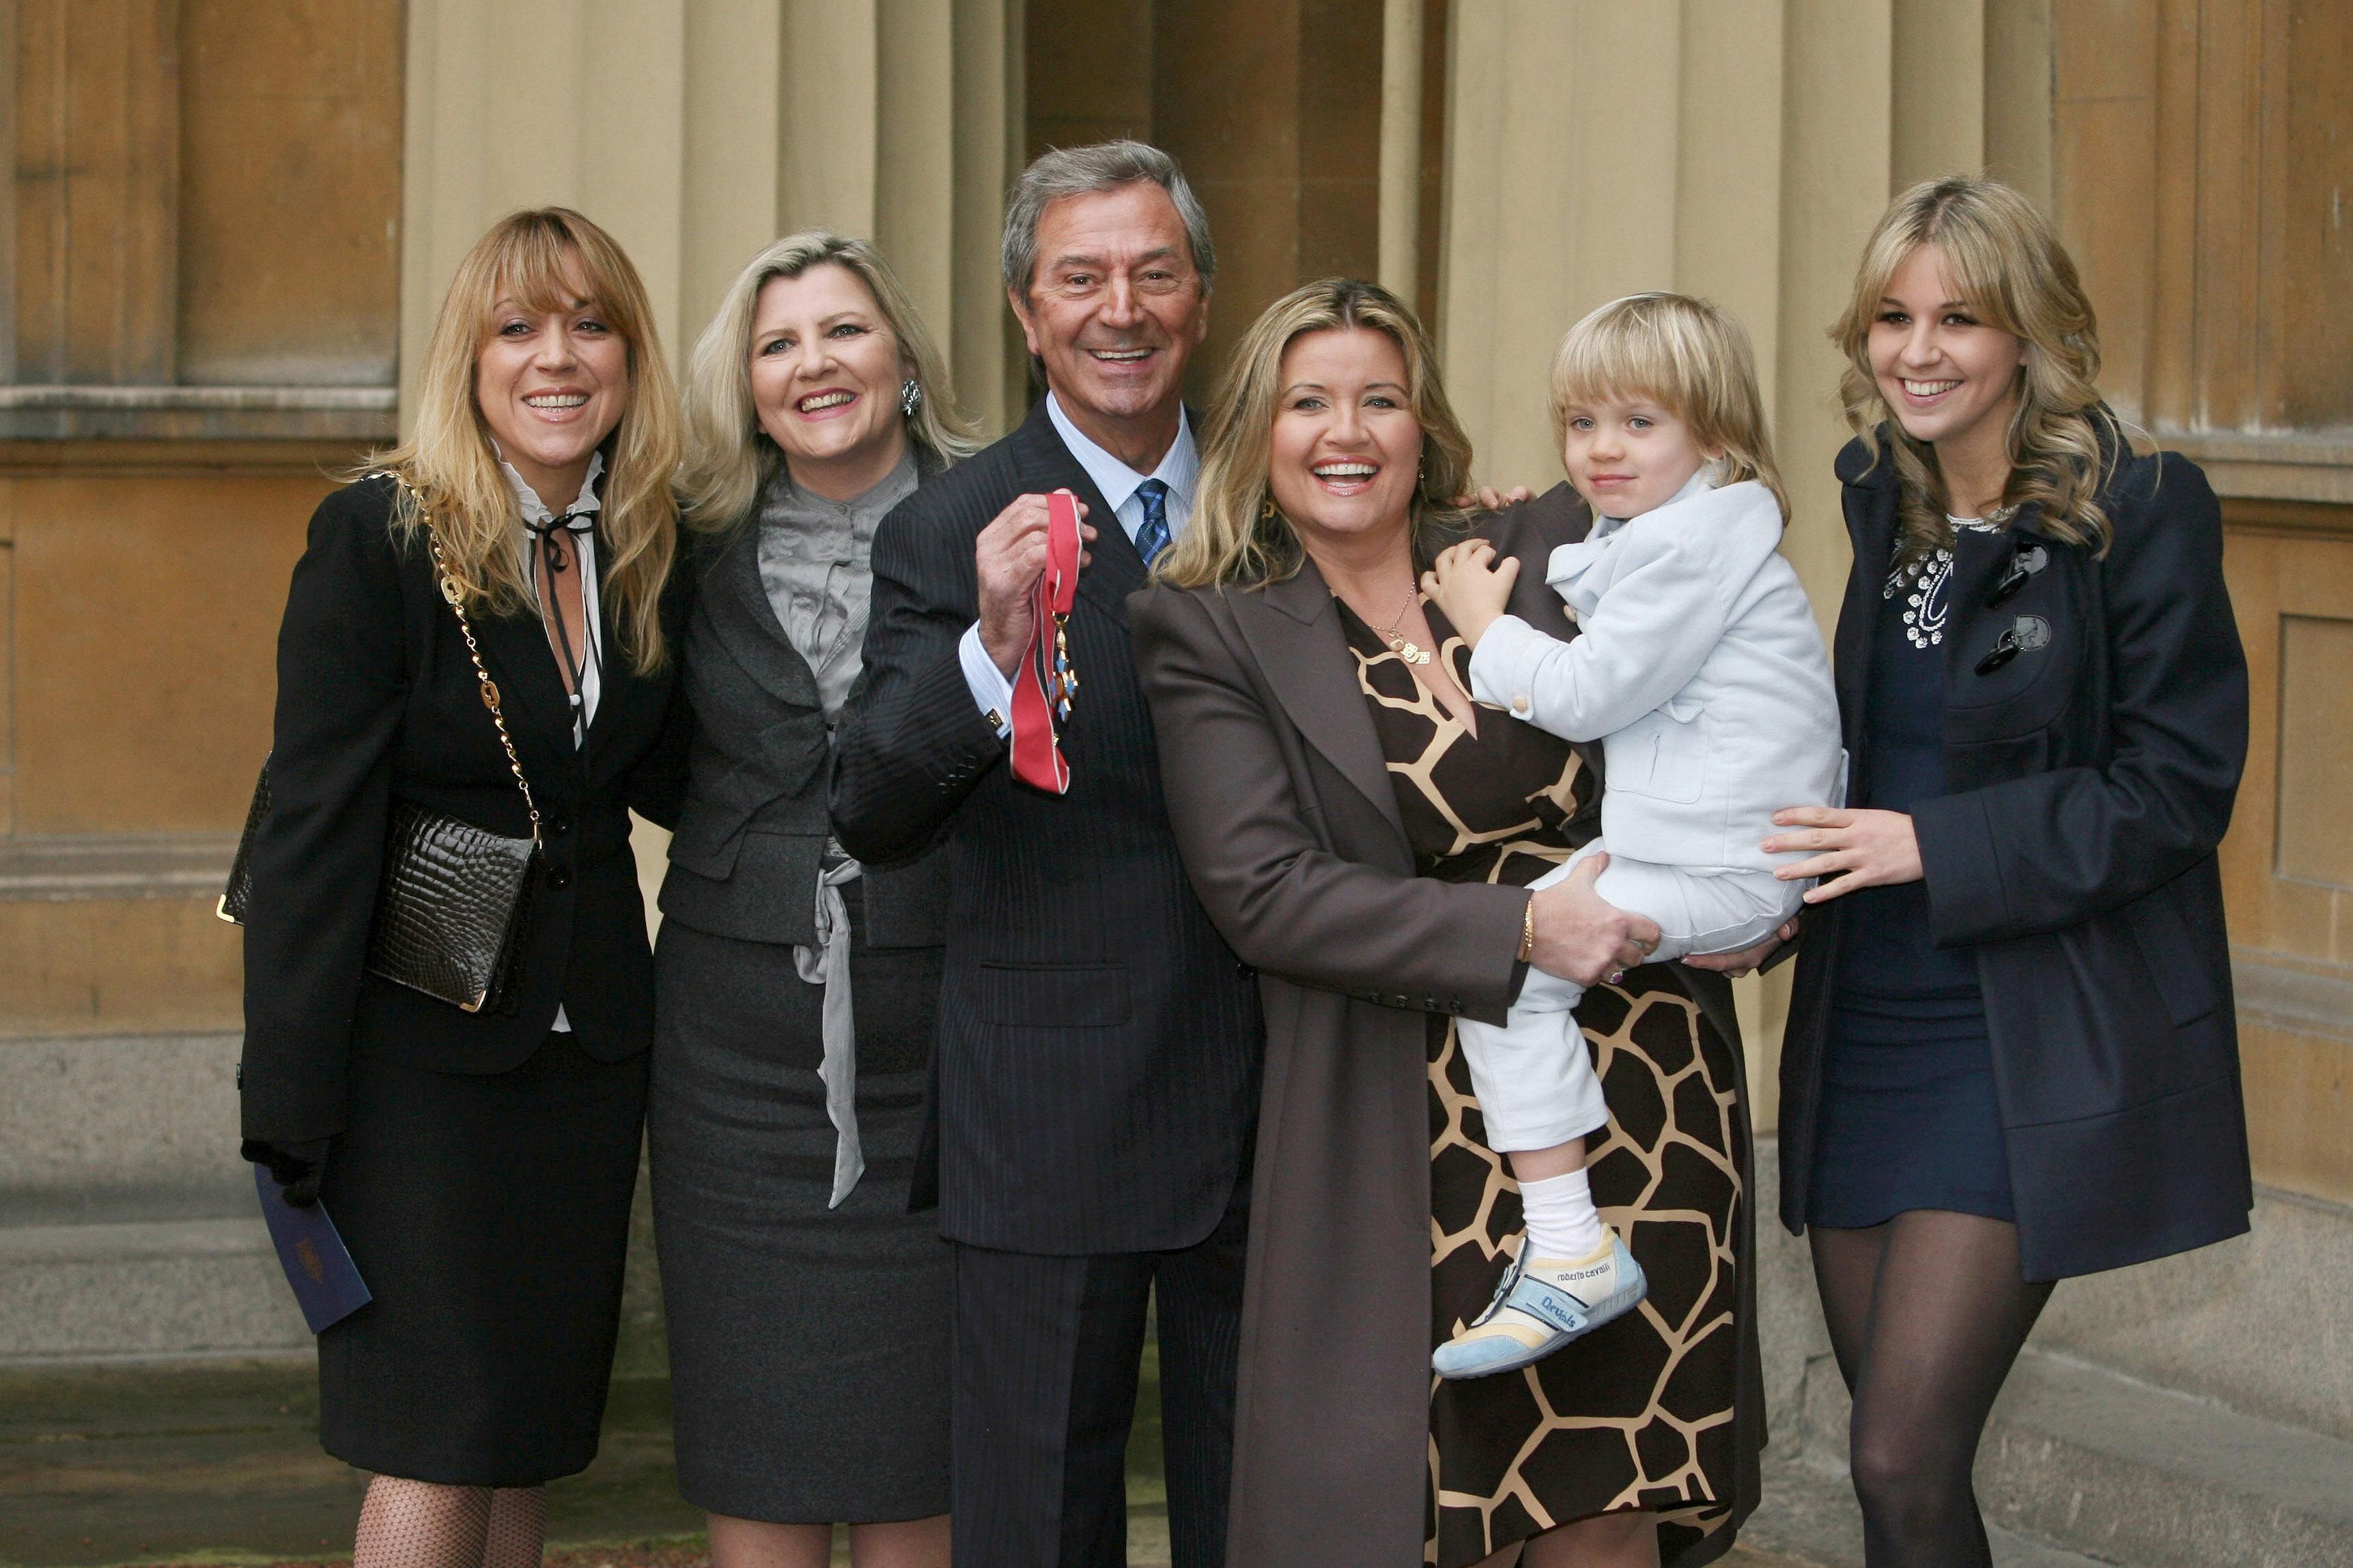 Kristina O’Connor (far right) with (from left) her half-sisters Samantha and Karen, father Des, stepmother Jodie, and half-brother Adam, after the entertainer received his CBE at Buckingham Palace in 2008